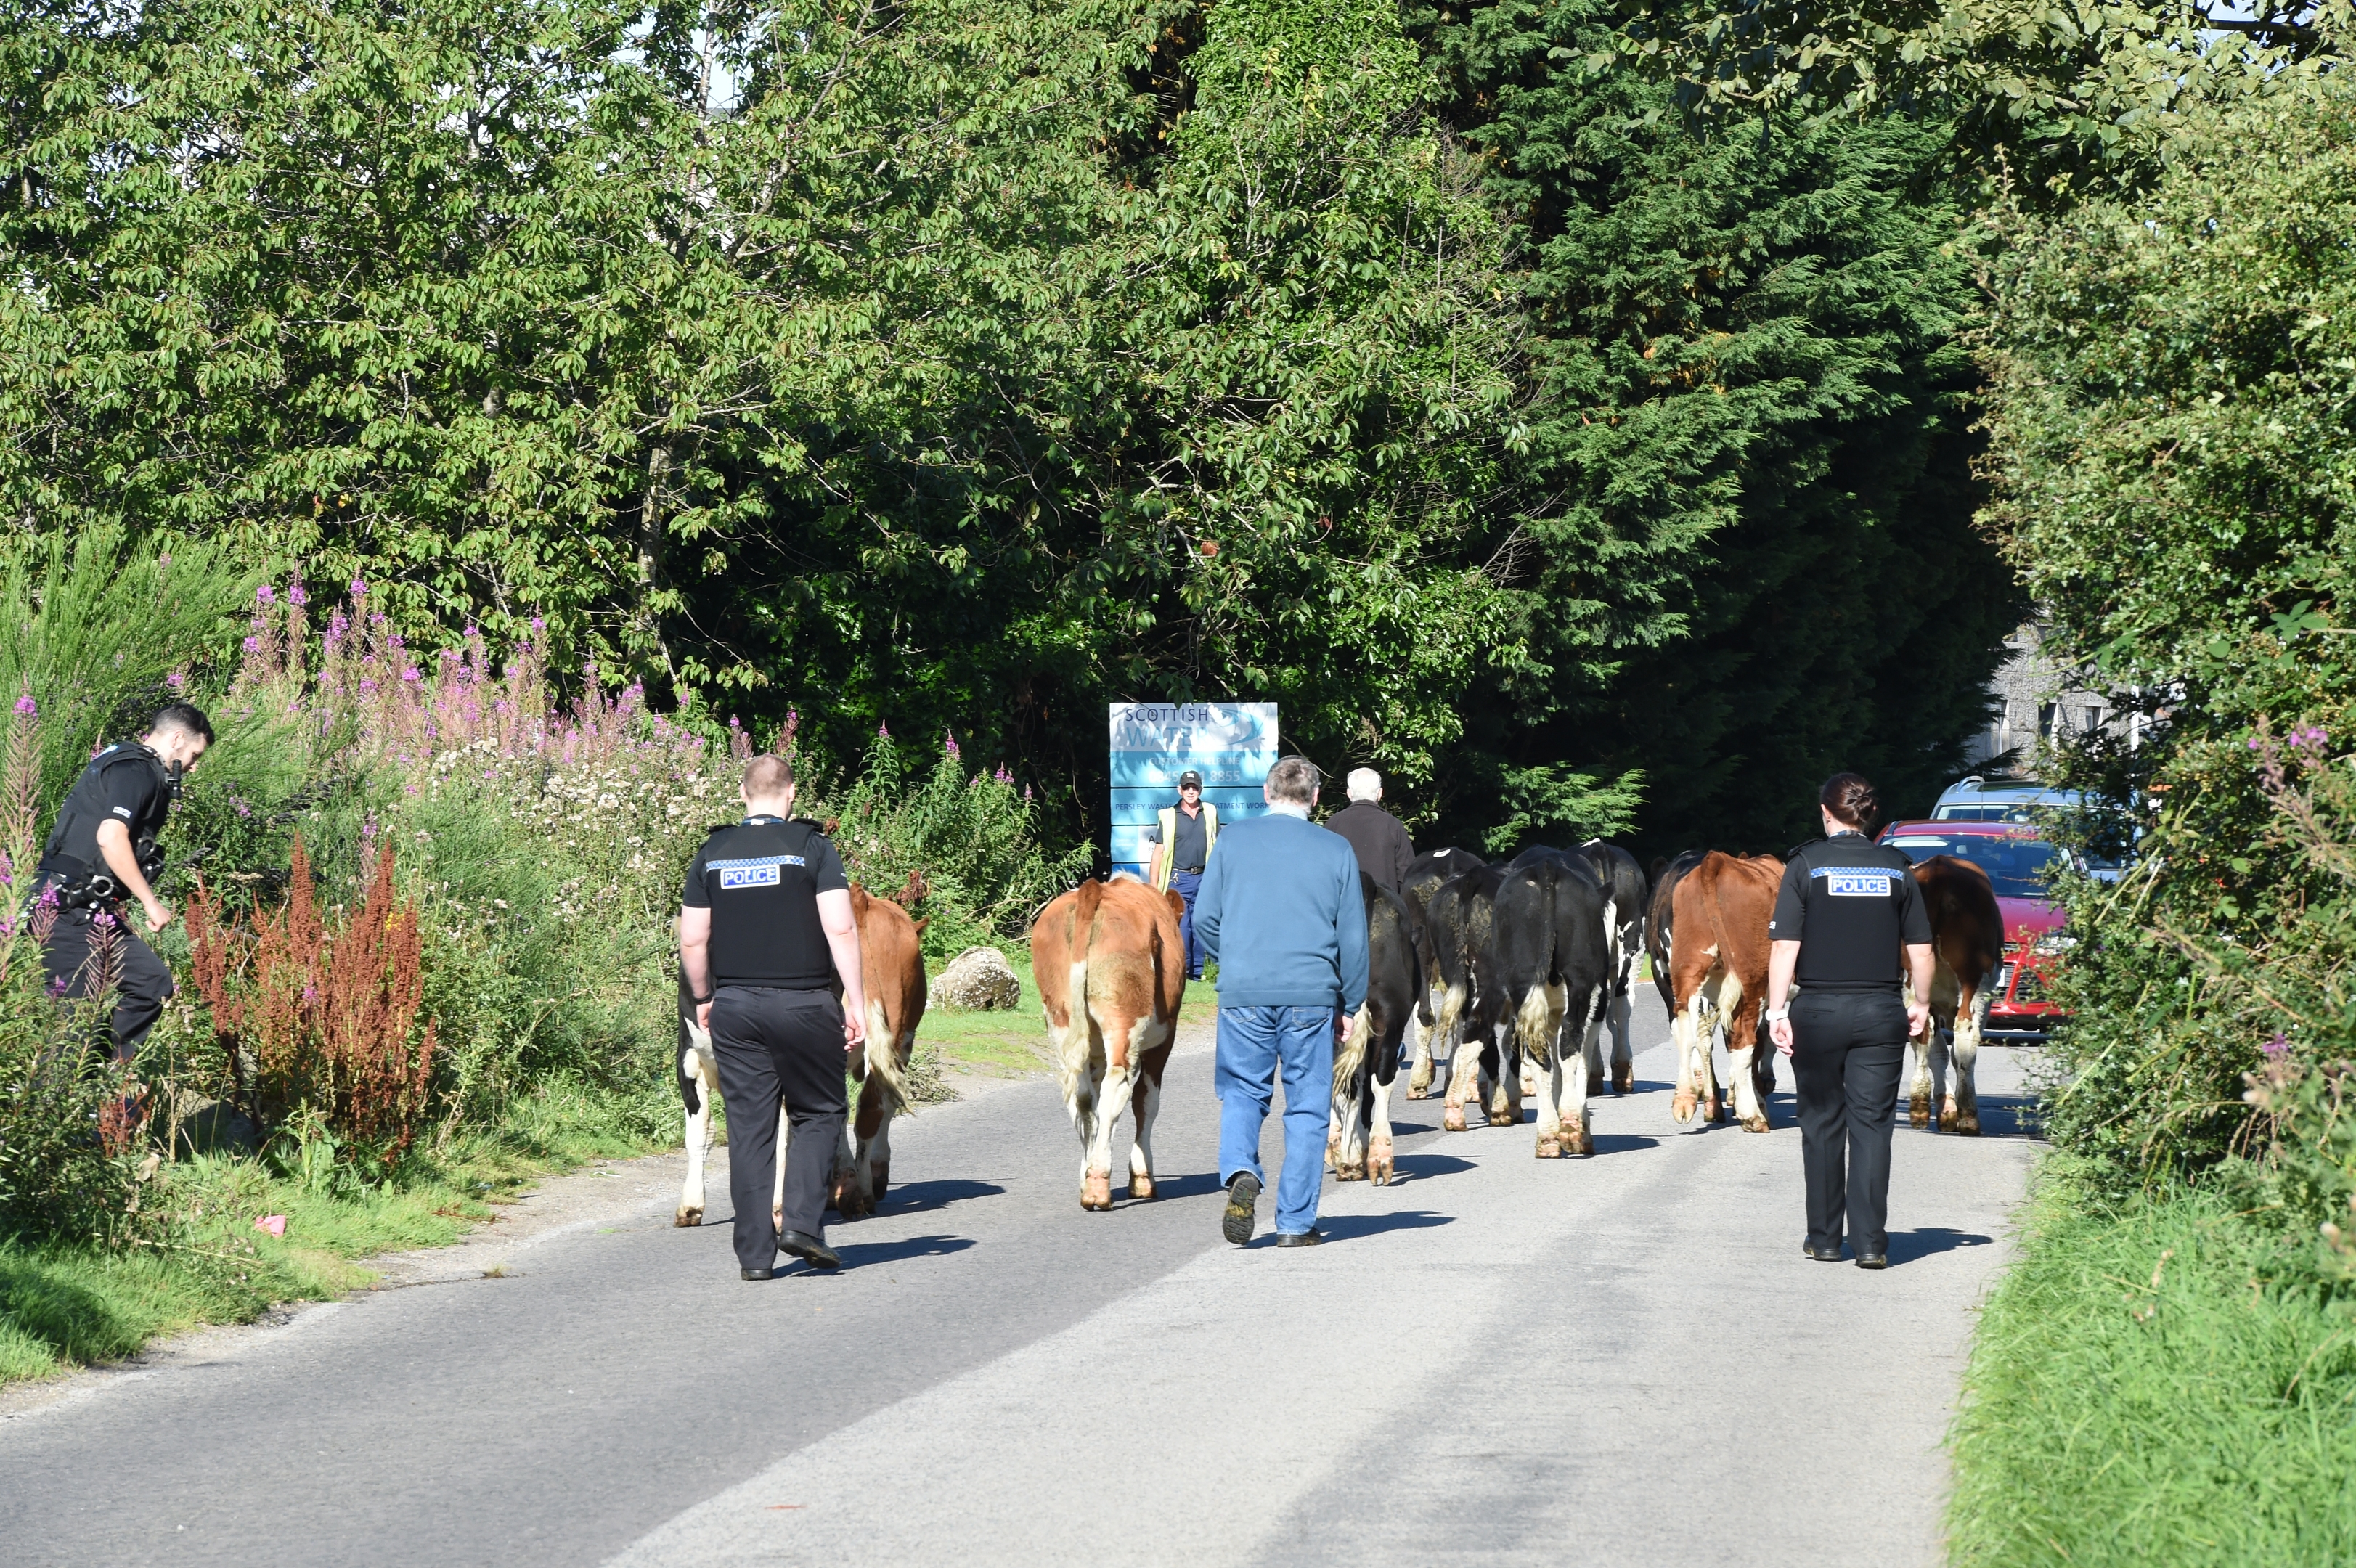 Officers helped the owners escort the cows home. Pics by Kevin Emslie